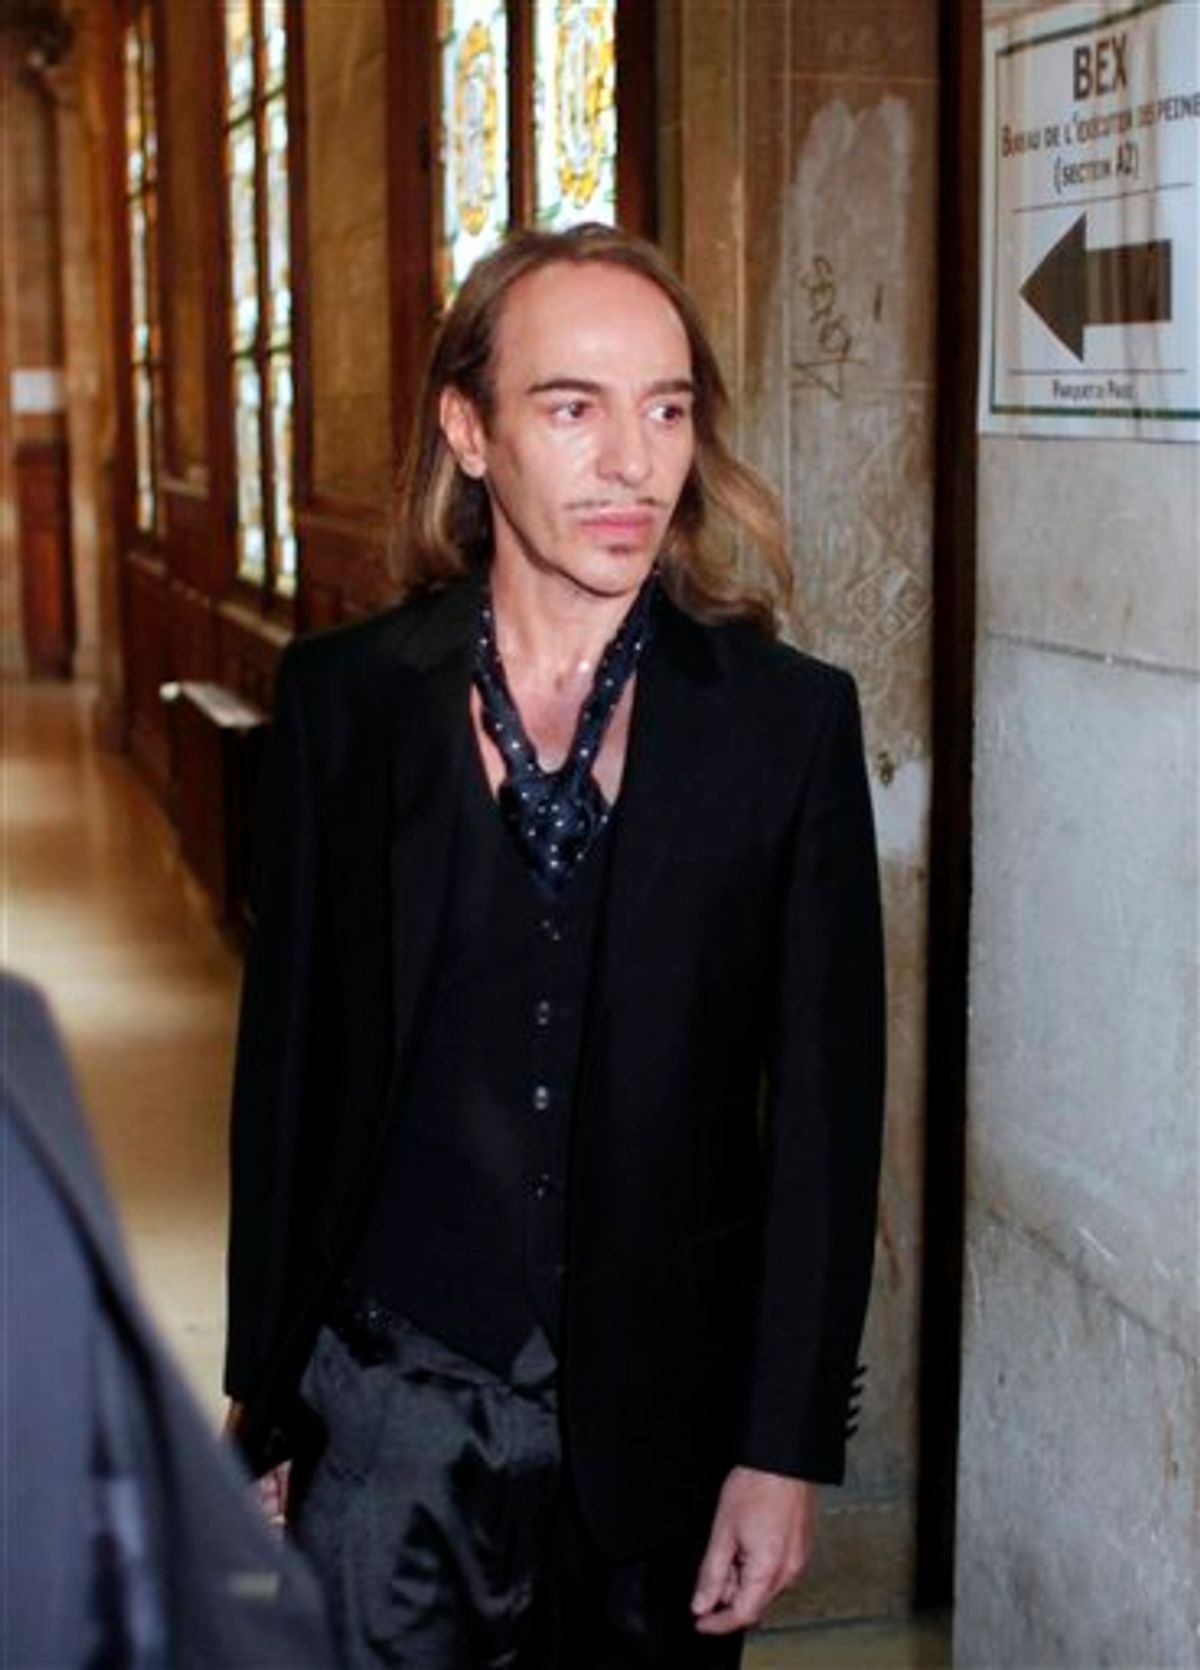 Former Dior designer John Galliano arrives at the Paris court house, Wednesday June 22, 2011, charged with hurling anti-Semitic slurs in a Paris cafe - allegations that shocked the fashion world and cost him his job at the renowned French high-fashion house. Galliano could face up to six months in prison and 22,500 euro ($32,175) in fines. The verdict is expected at a later date. (AP Photo/Thibault Camus)   (AP)